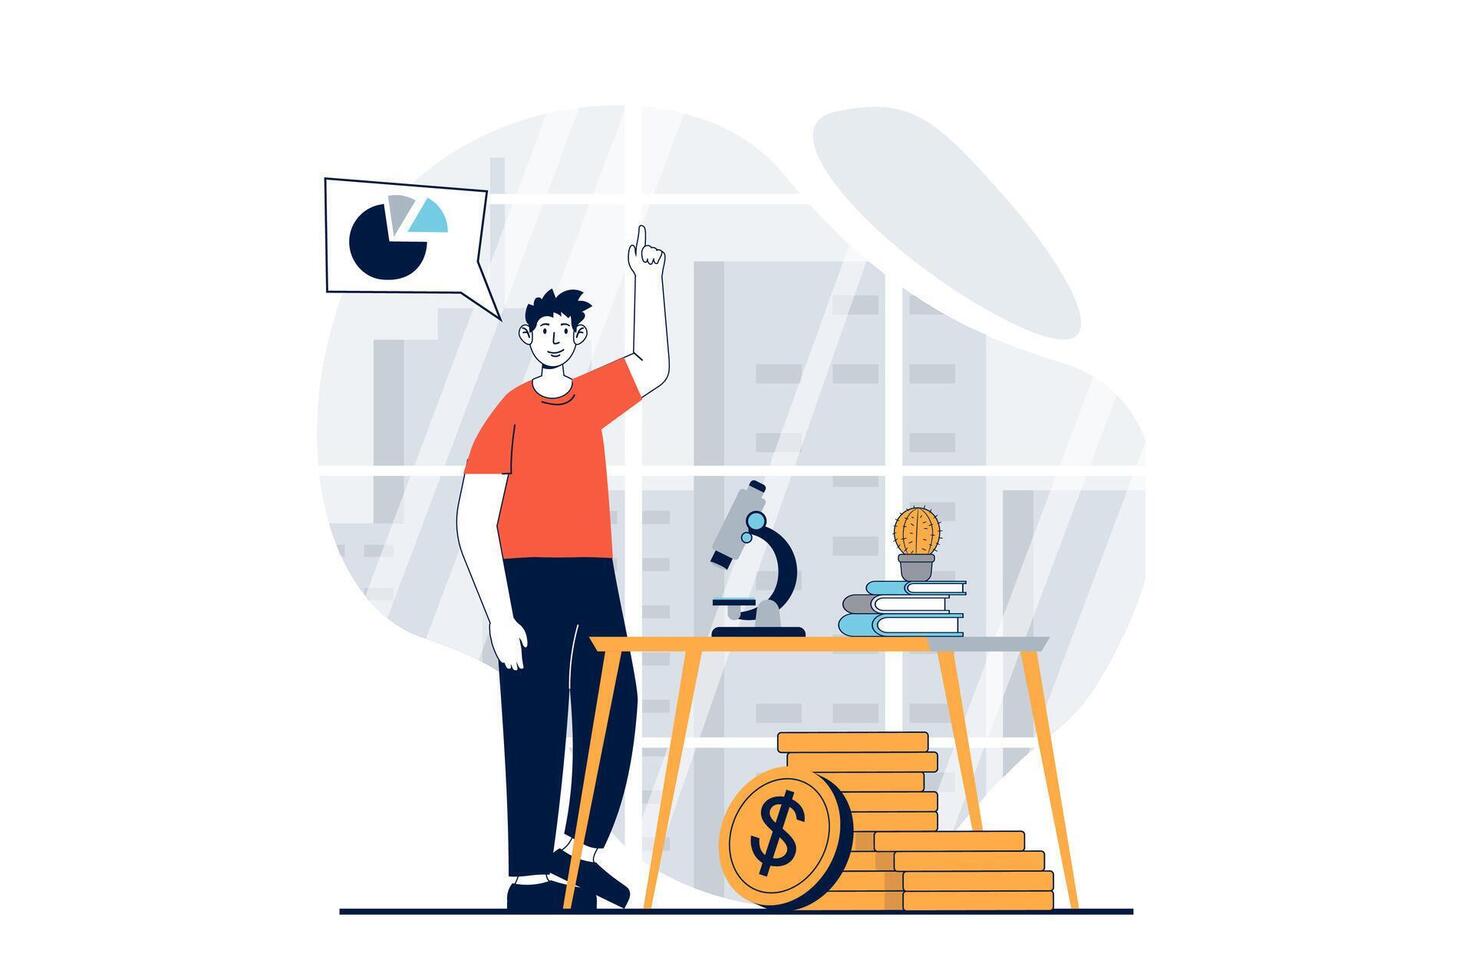 Data science concept with people scene in flat design for web. Man scientist working with microscope, creating financial diagrams. Vector illustration for social media banner, marketing material.